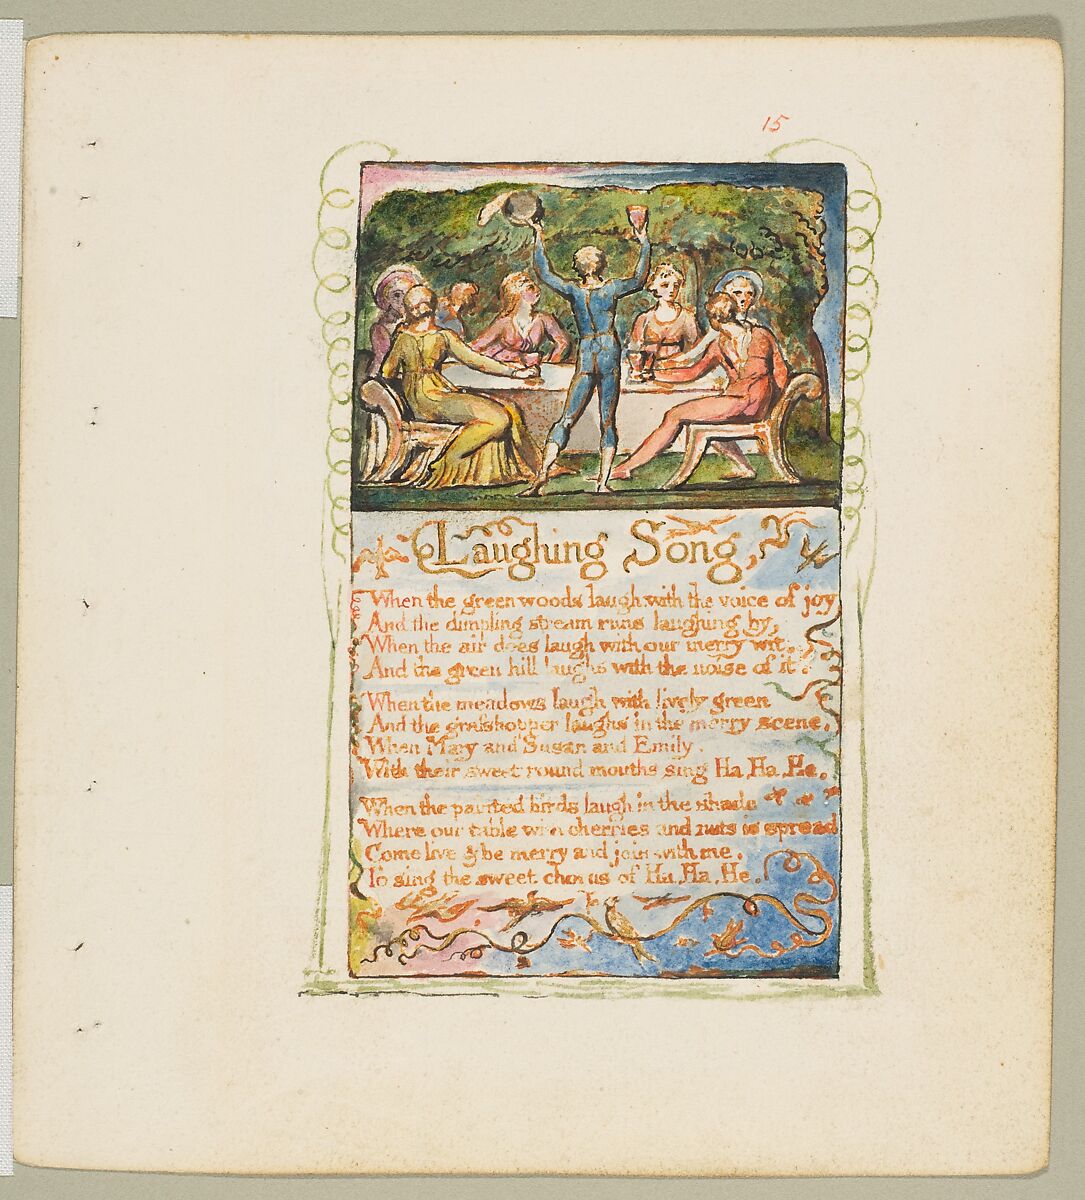 Songs of Innocence: Laughing Song, William Blake  British, Relief etching printed in orange-brown ink and hand-colored with watercolor and shell gold